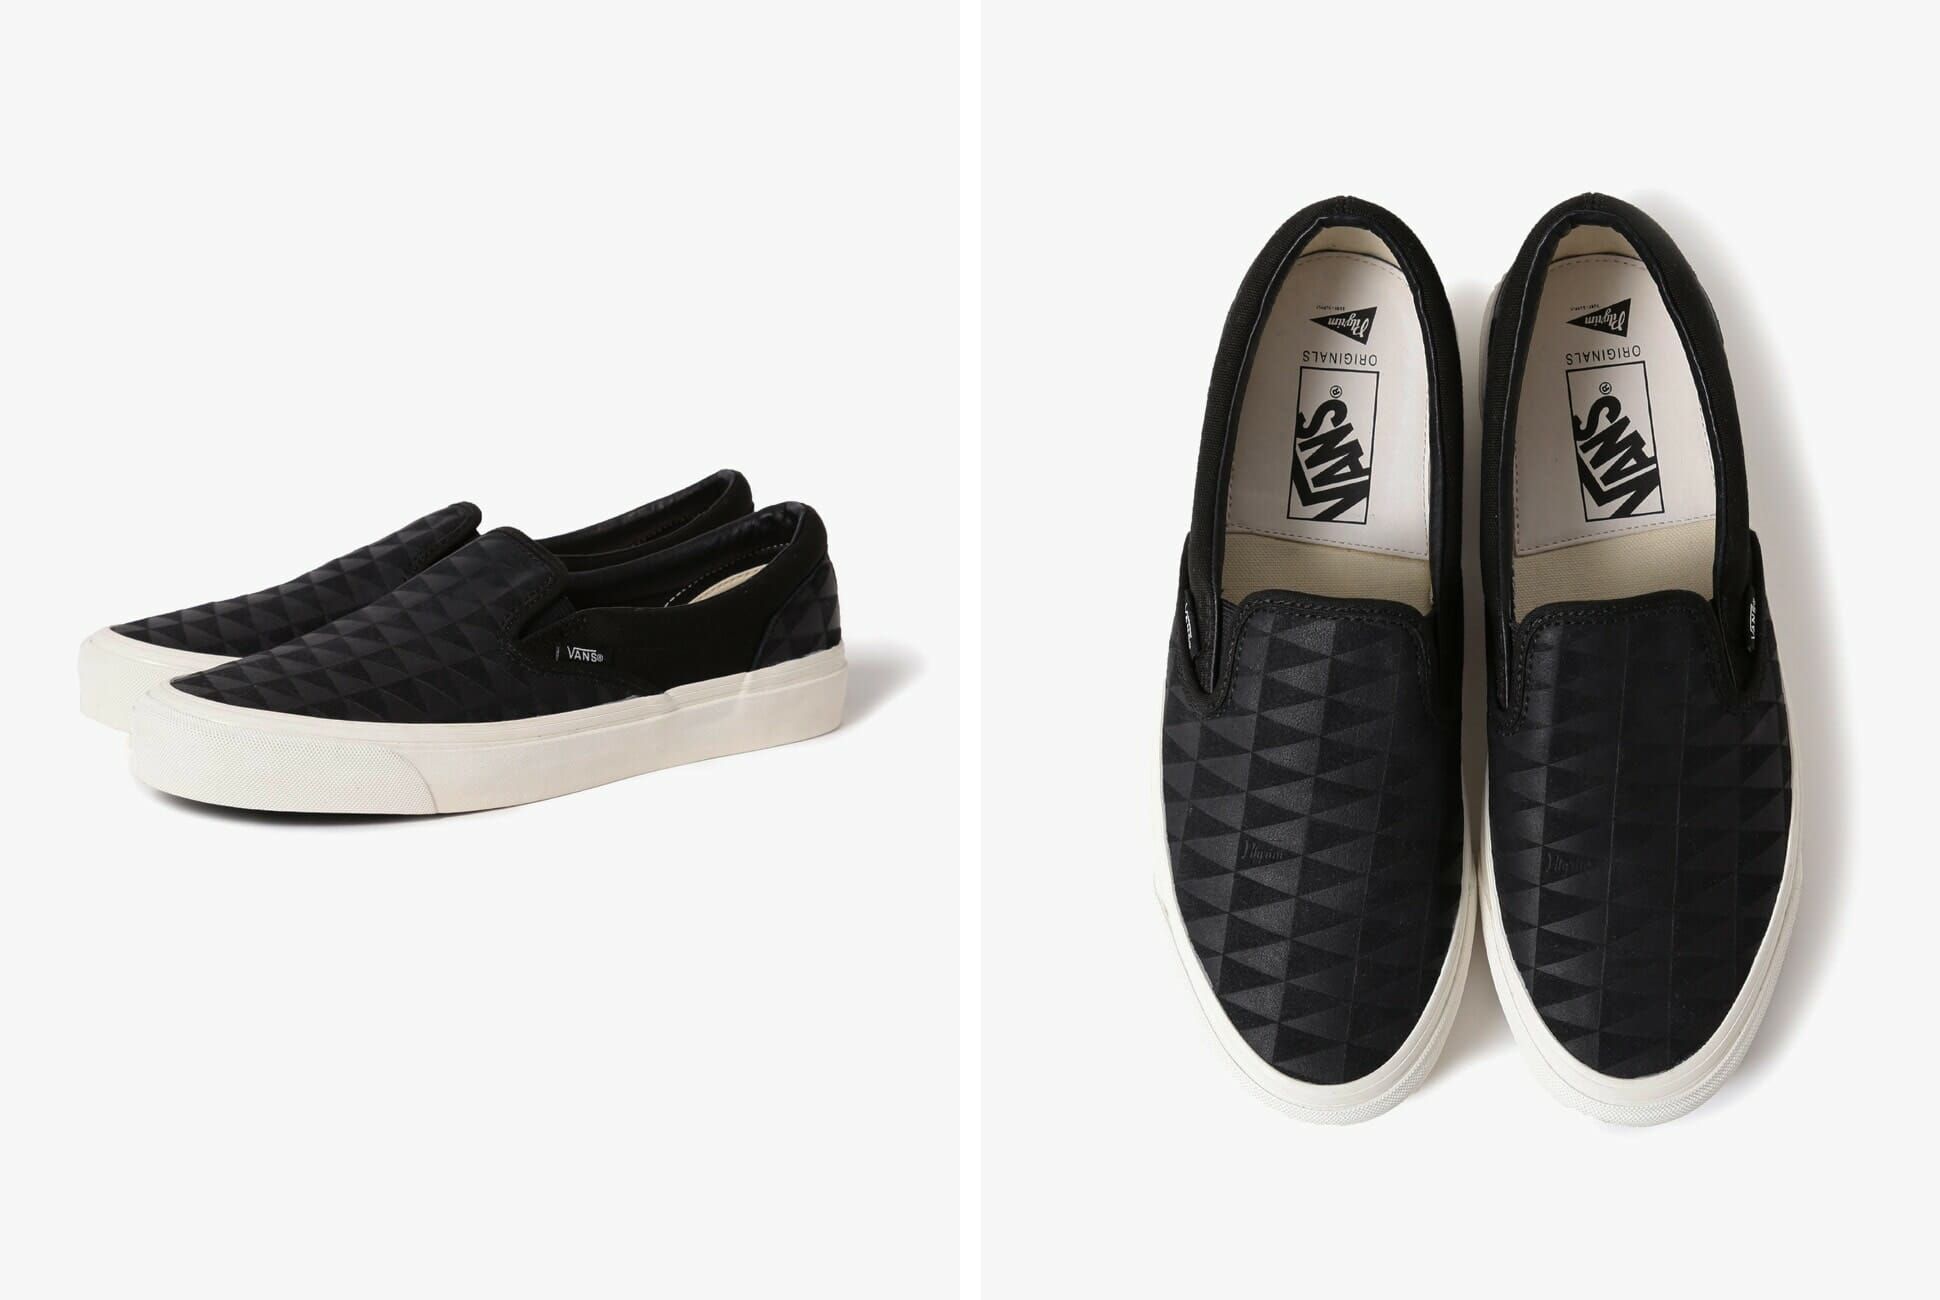 Limited-Edition Sneakers From Vans